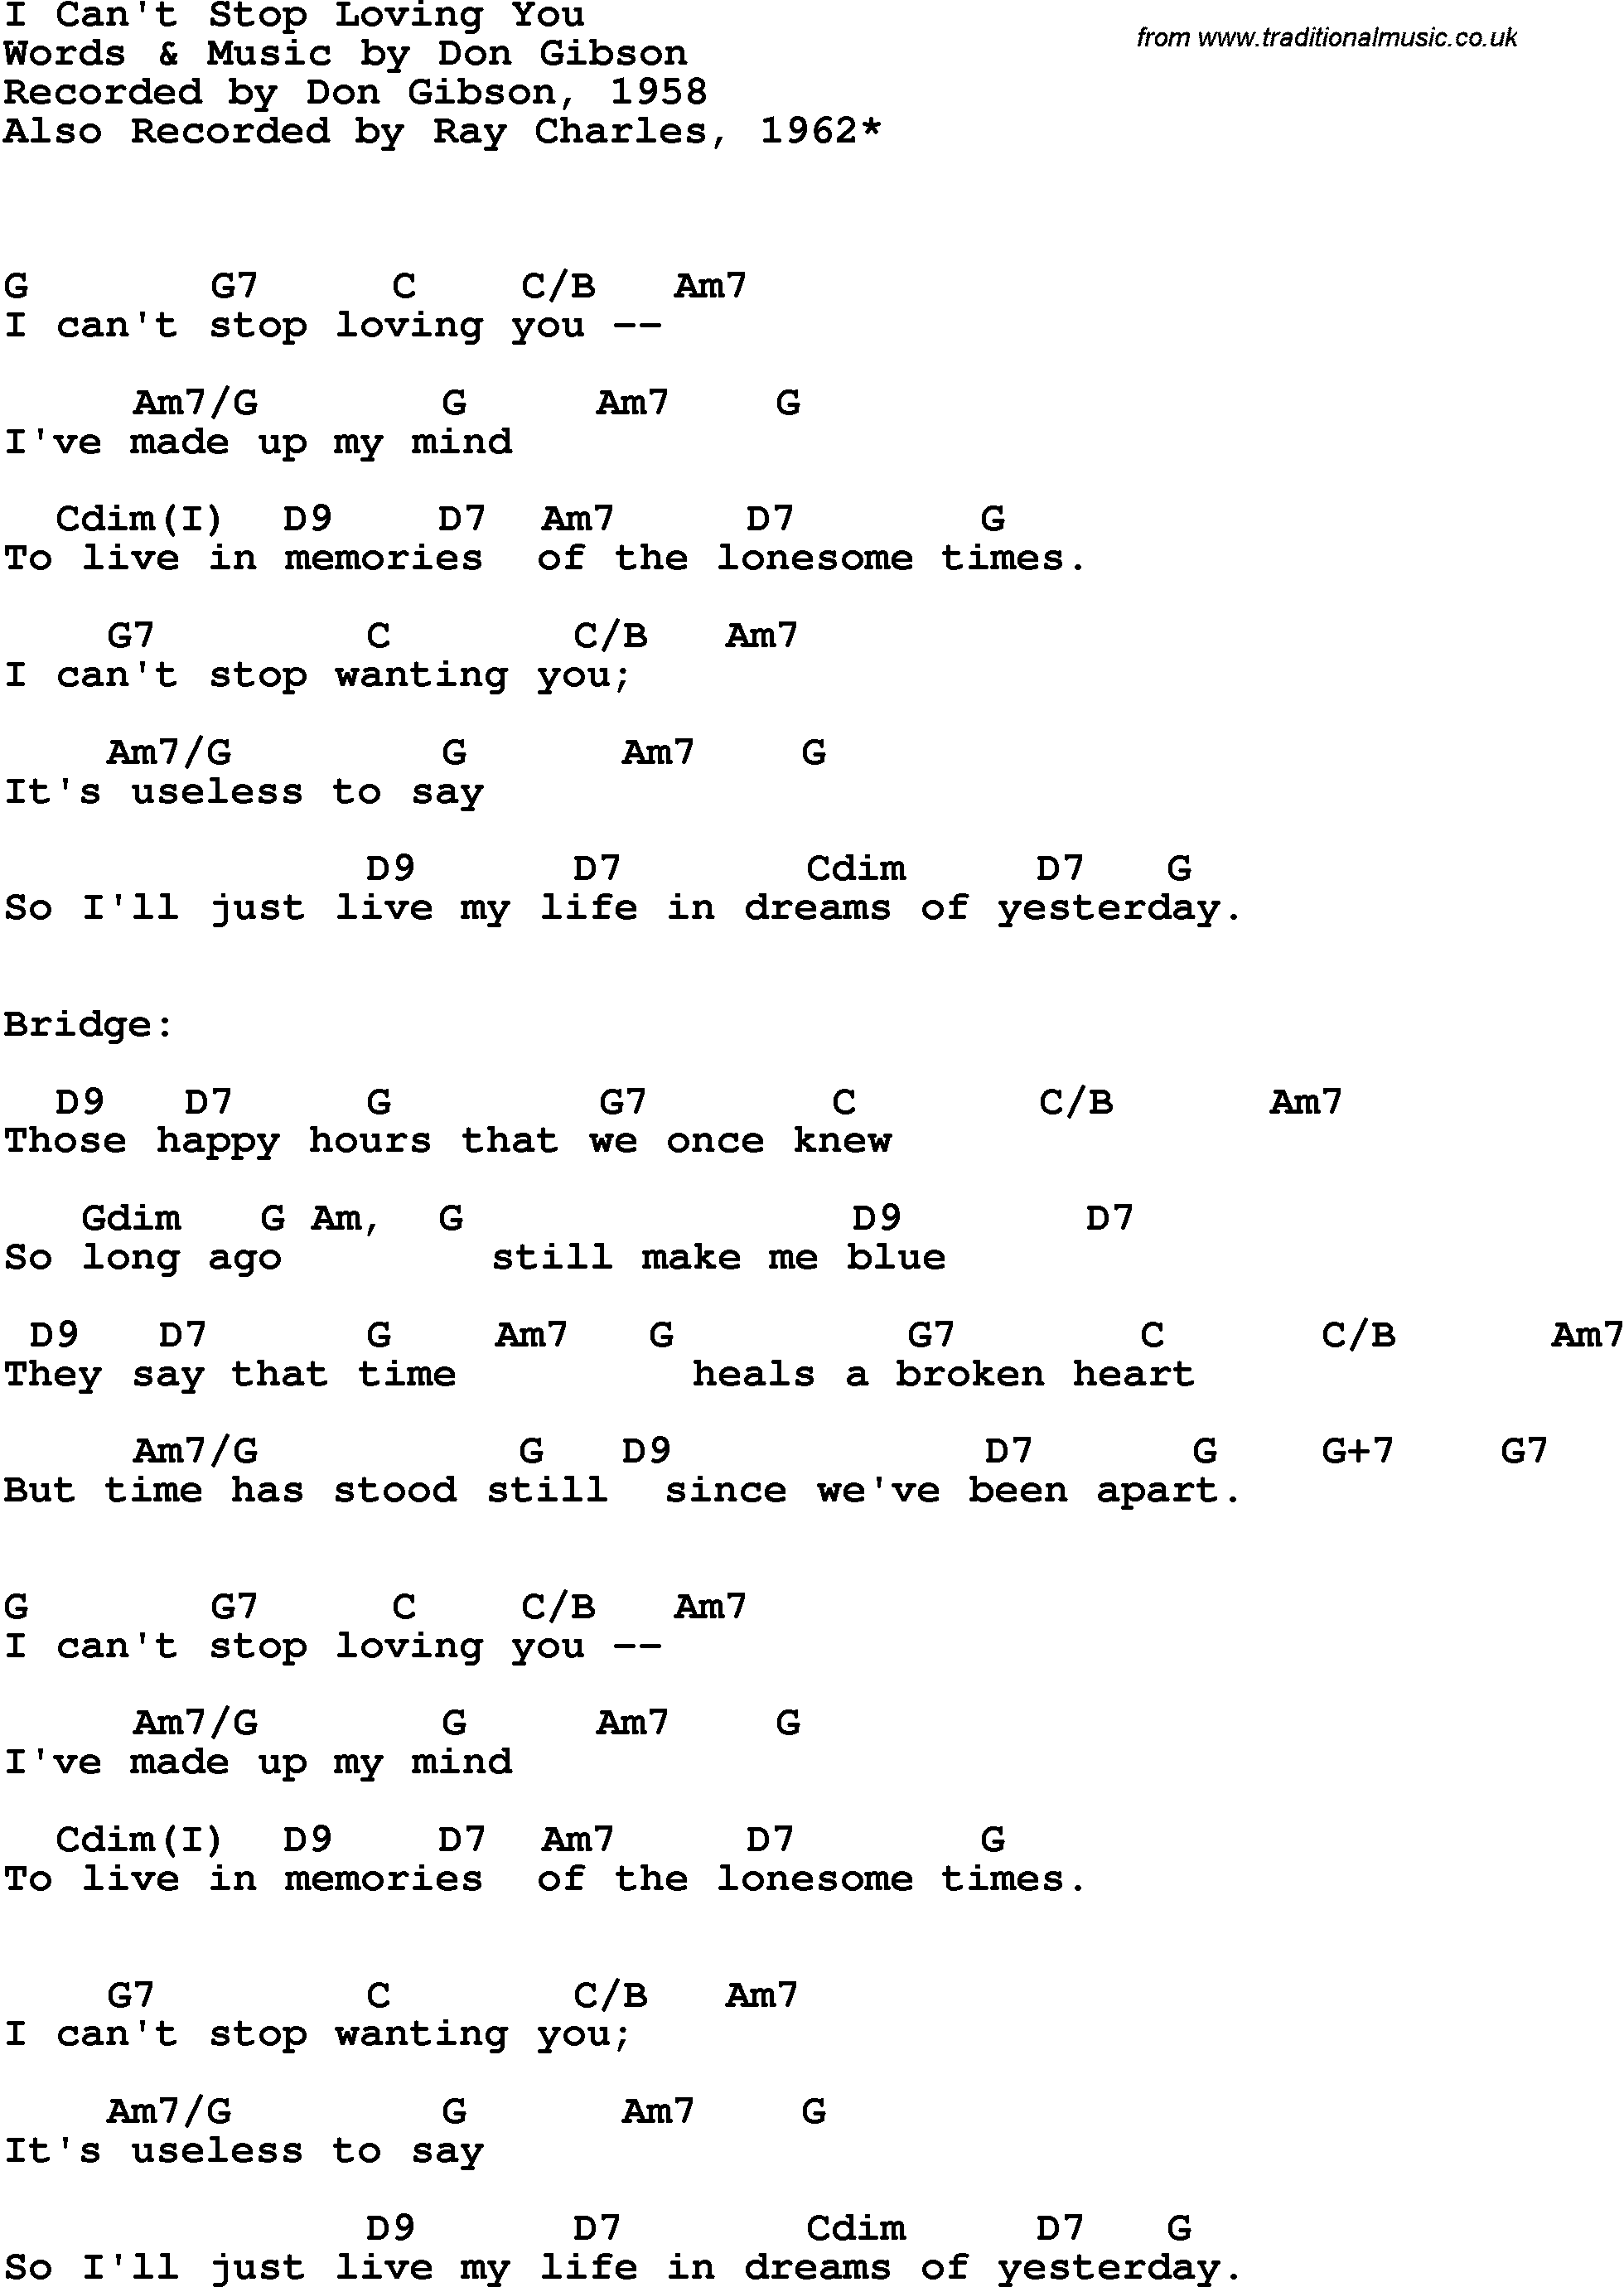 Song Lyrics with guitar chords for I Can't Stop Loving You - Ray Charles, 1962